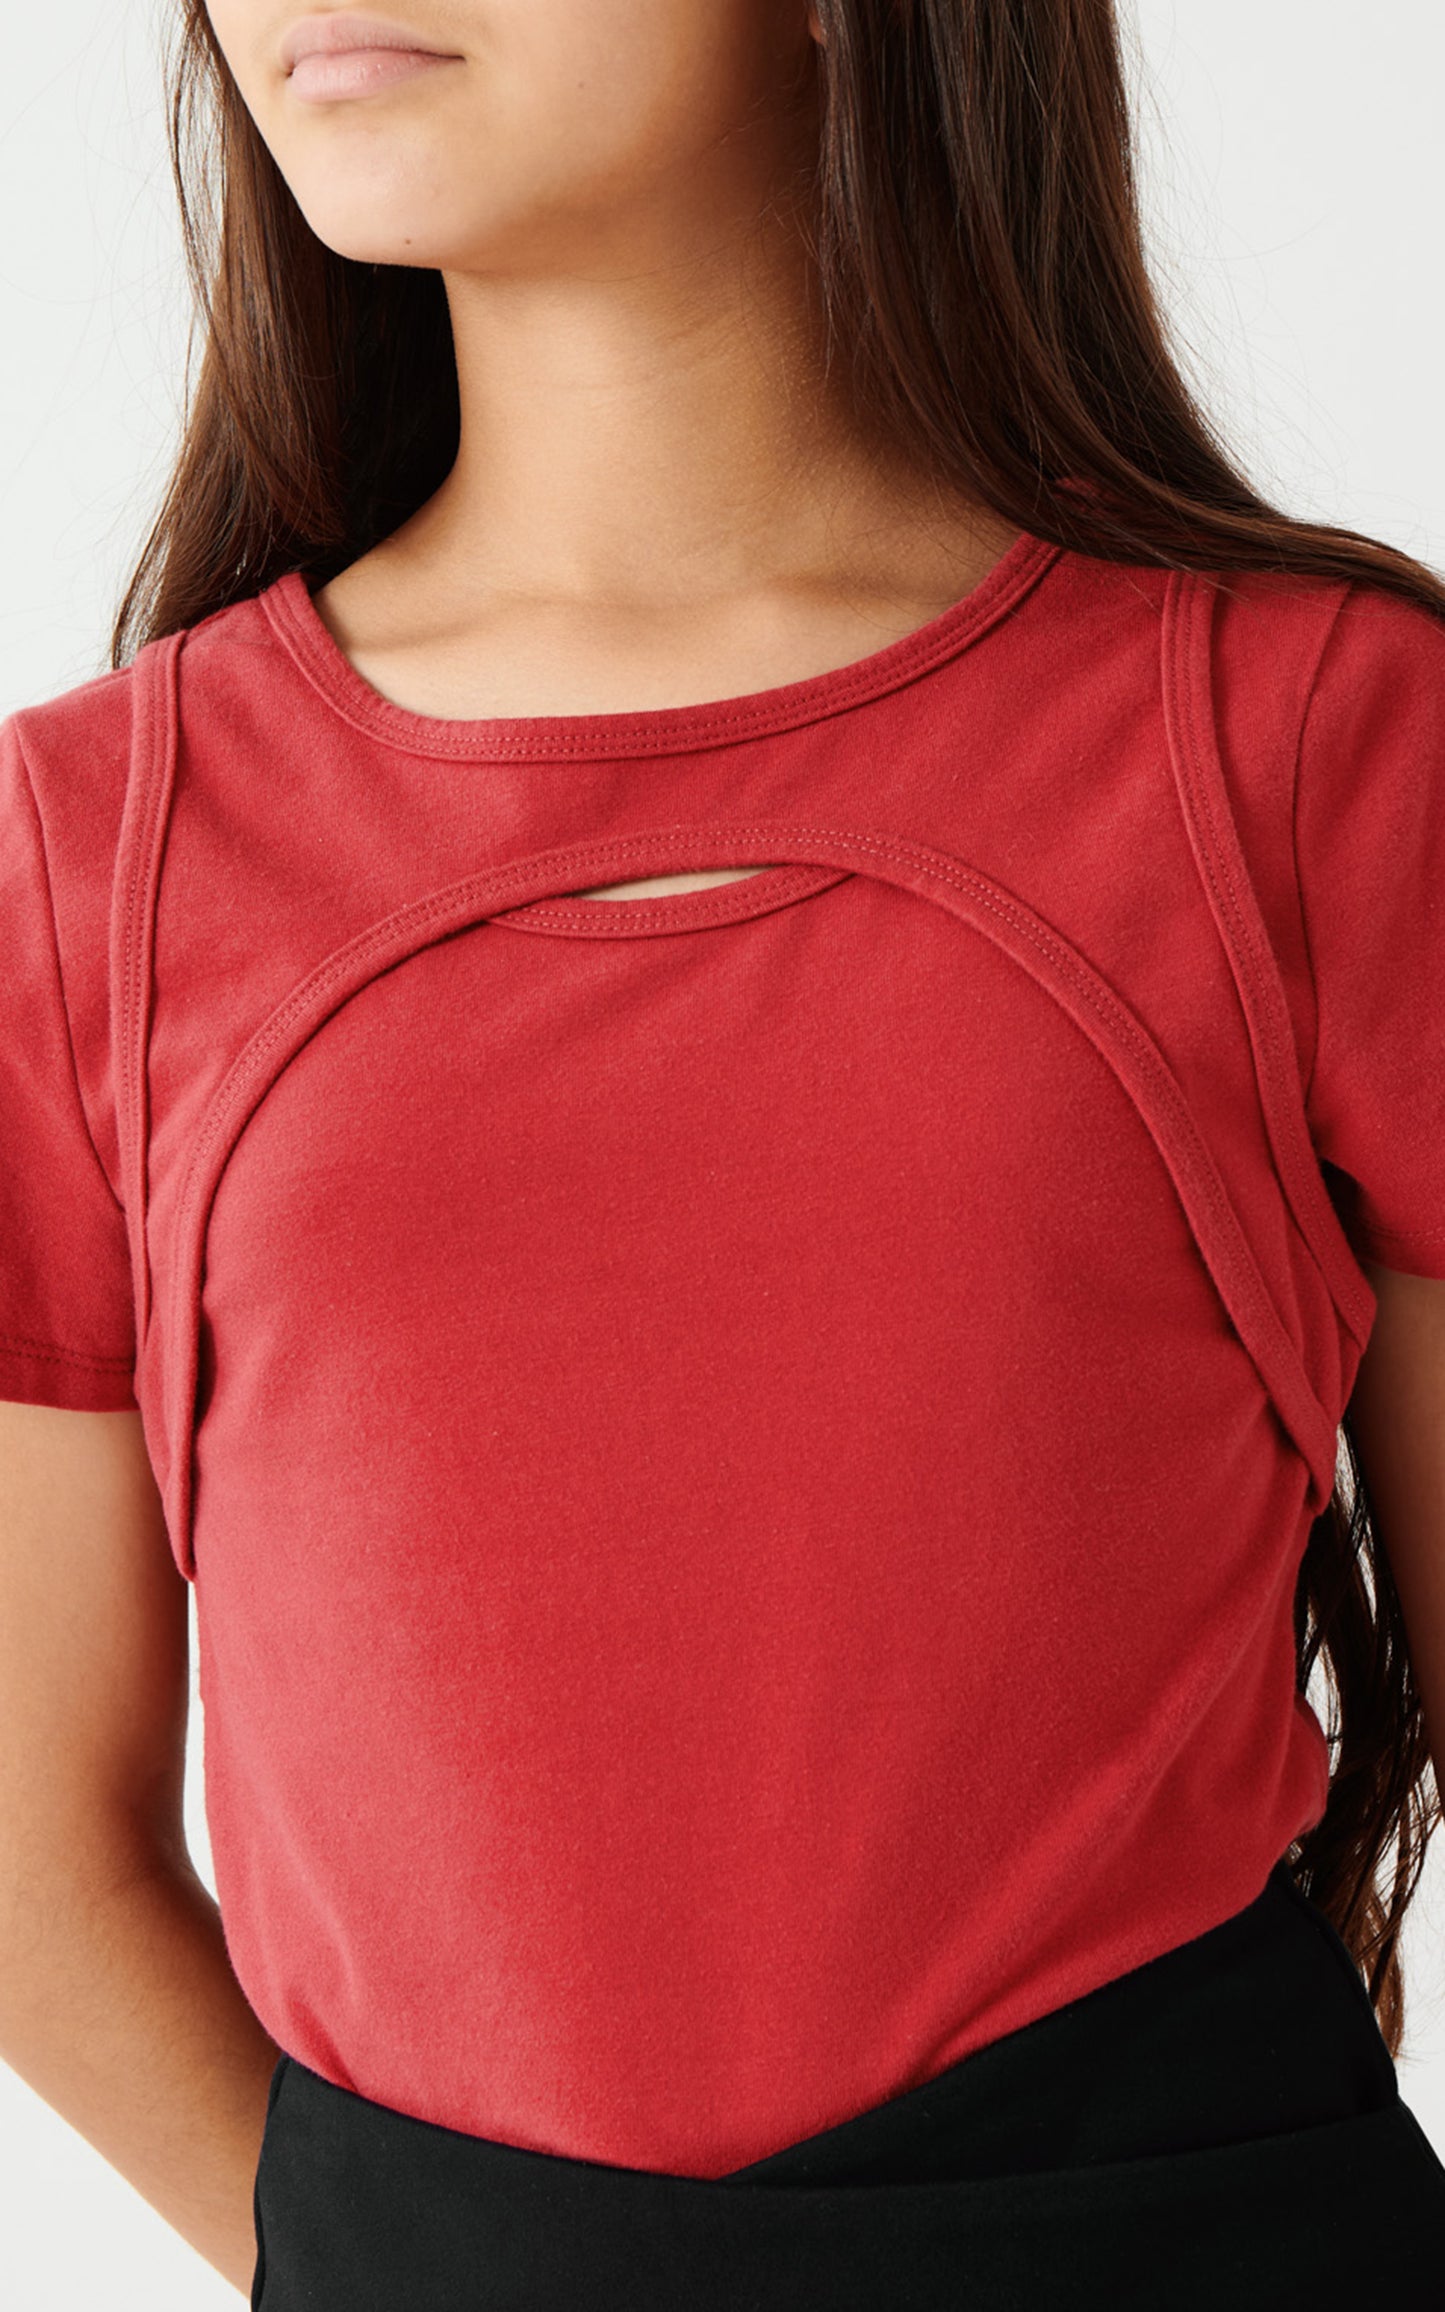 GIRL WEARING DARK RED SHORT SLEEVE TOP WITH A SMALL KEYHOLE CUT-OUT AT THE UPPER BODICE